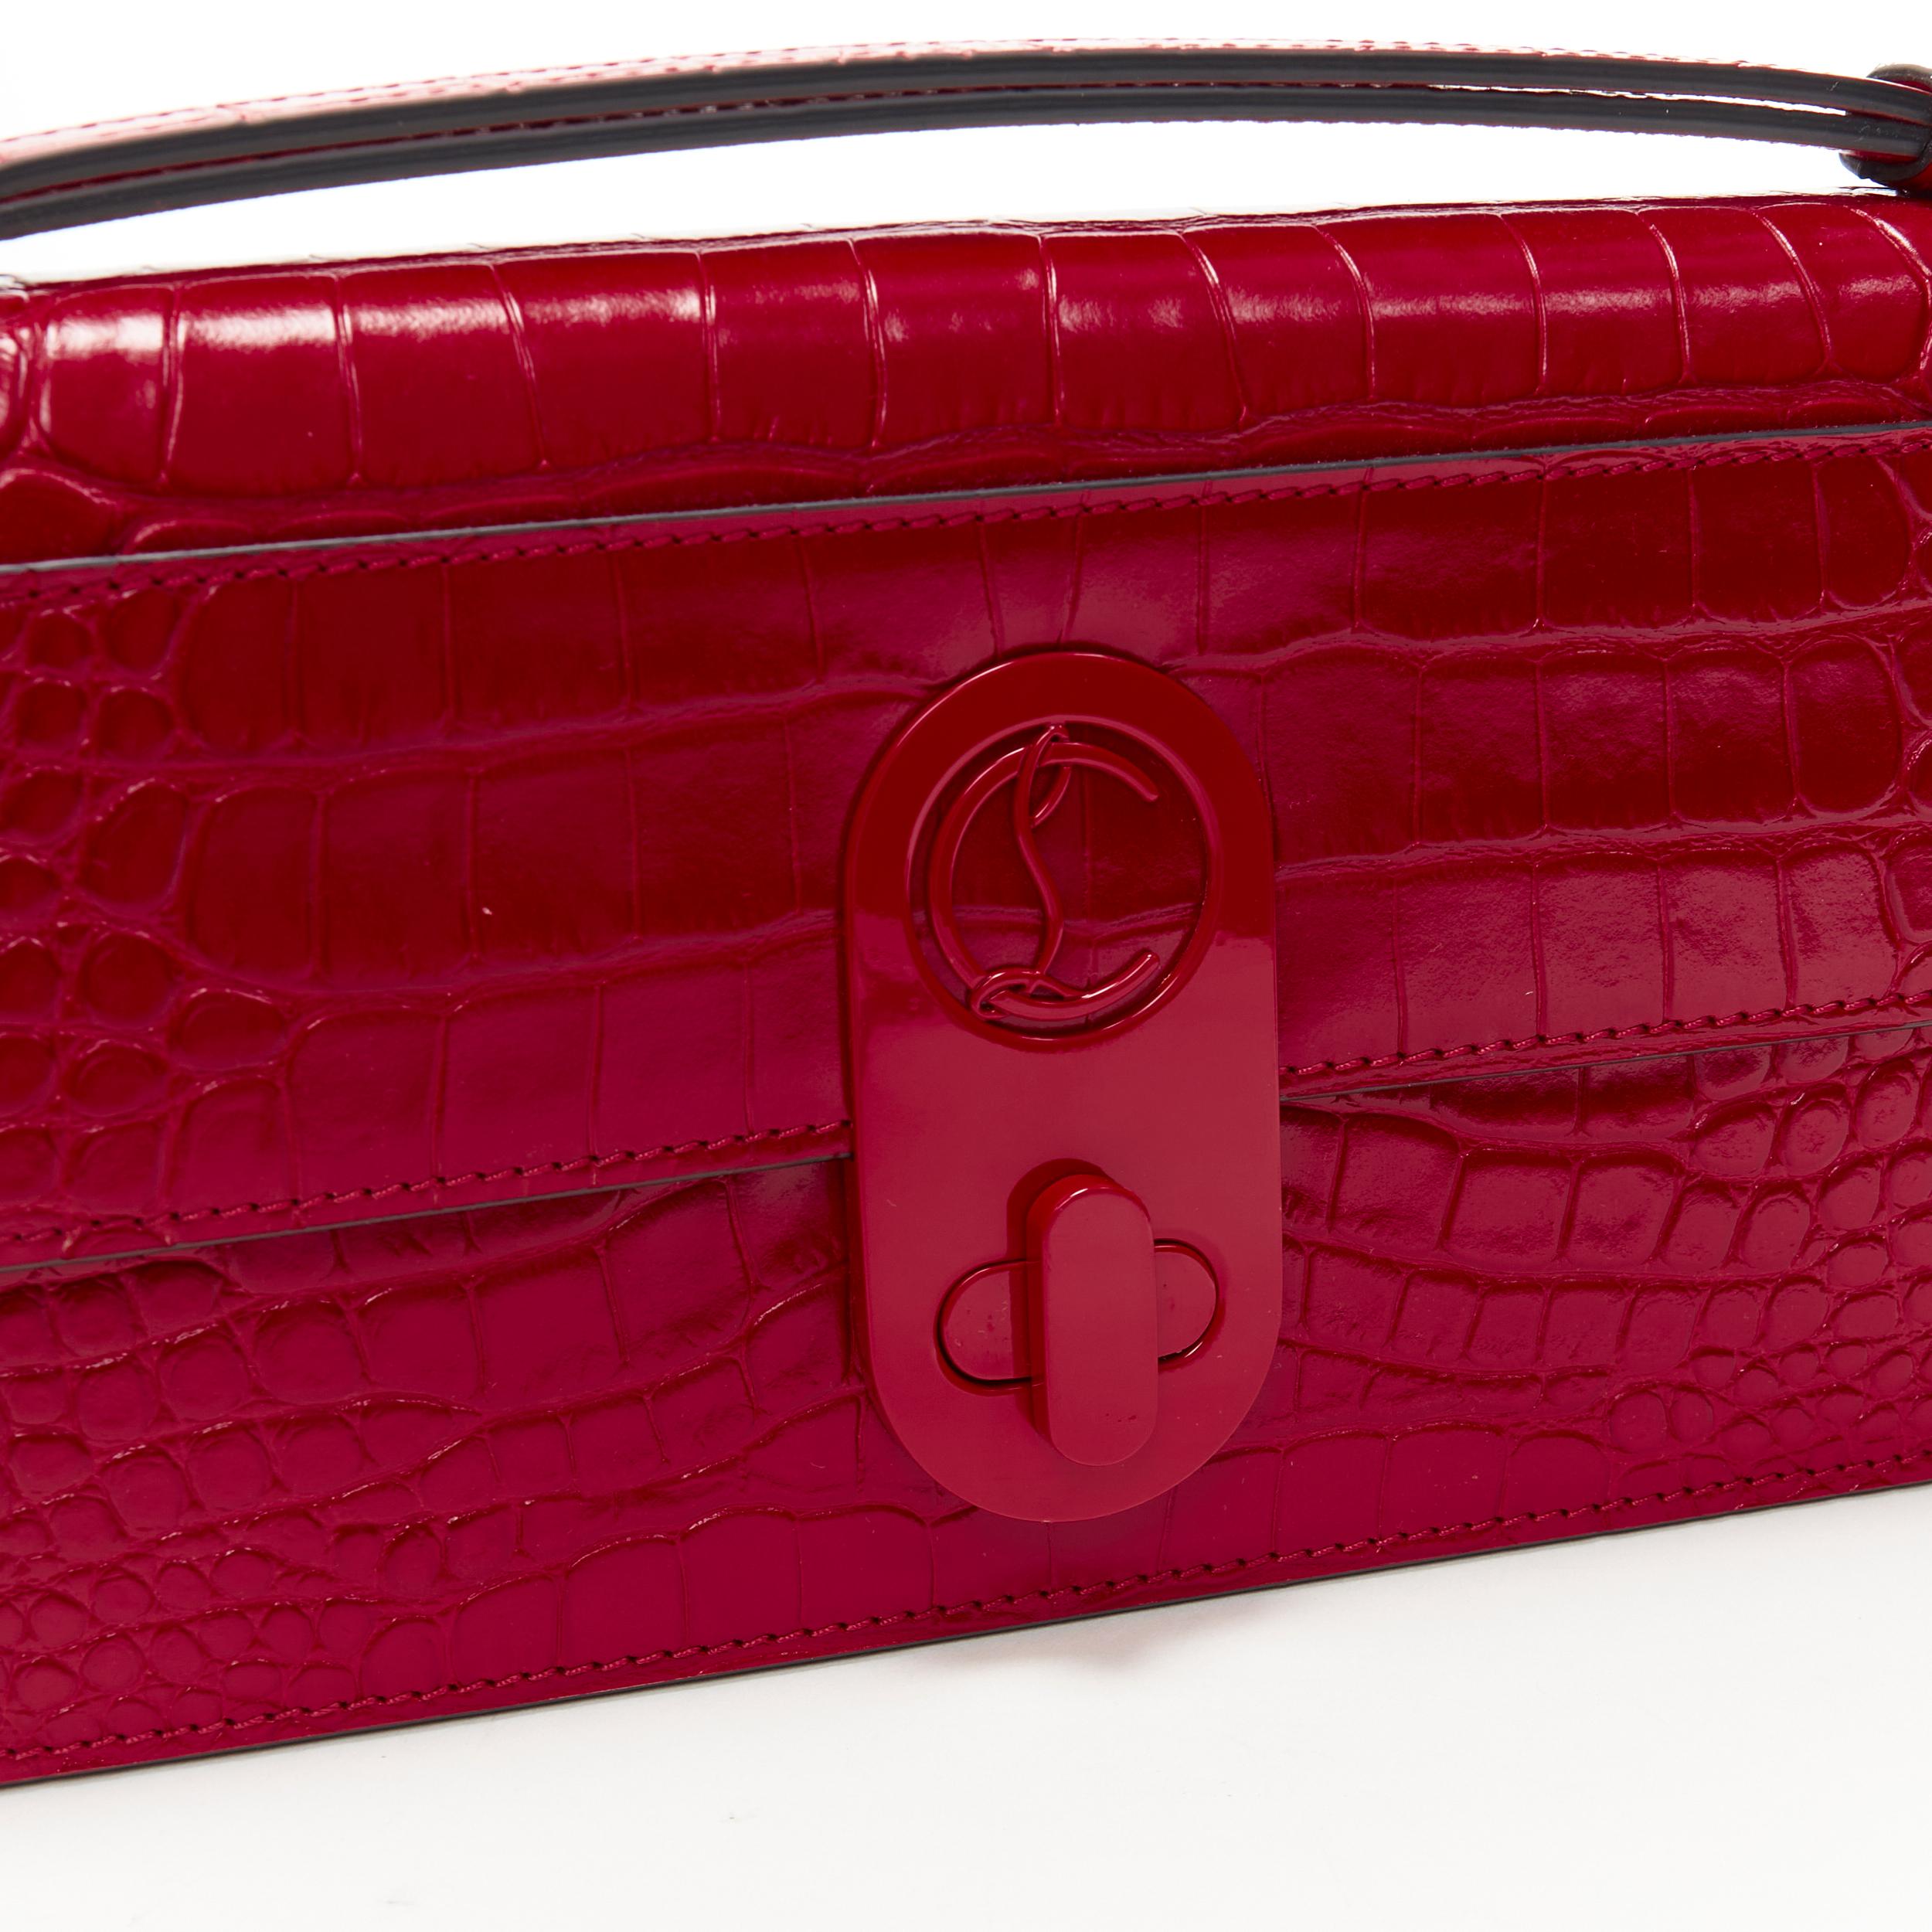 new CHRISTIAN LOUBOUTIN Elisa Baguetta stamped croc calf leather clutch bag Reference: MAWG/A00056 
Brand: Christian Louboutin 
Designer: Christian Louboutin 
Model: Elisa Baguette 
Material: Leather 
Color: Red 
Pattern: Solid 
Closure: Turnlock